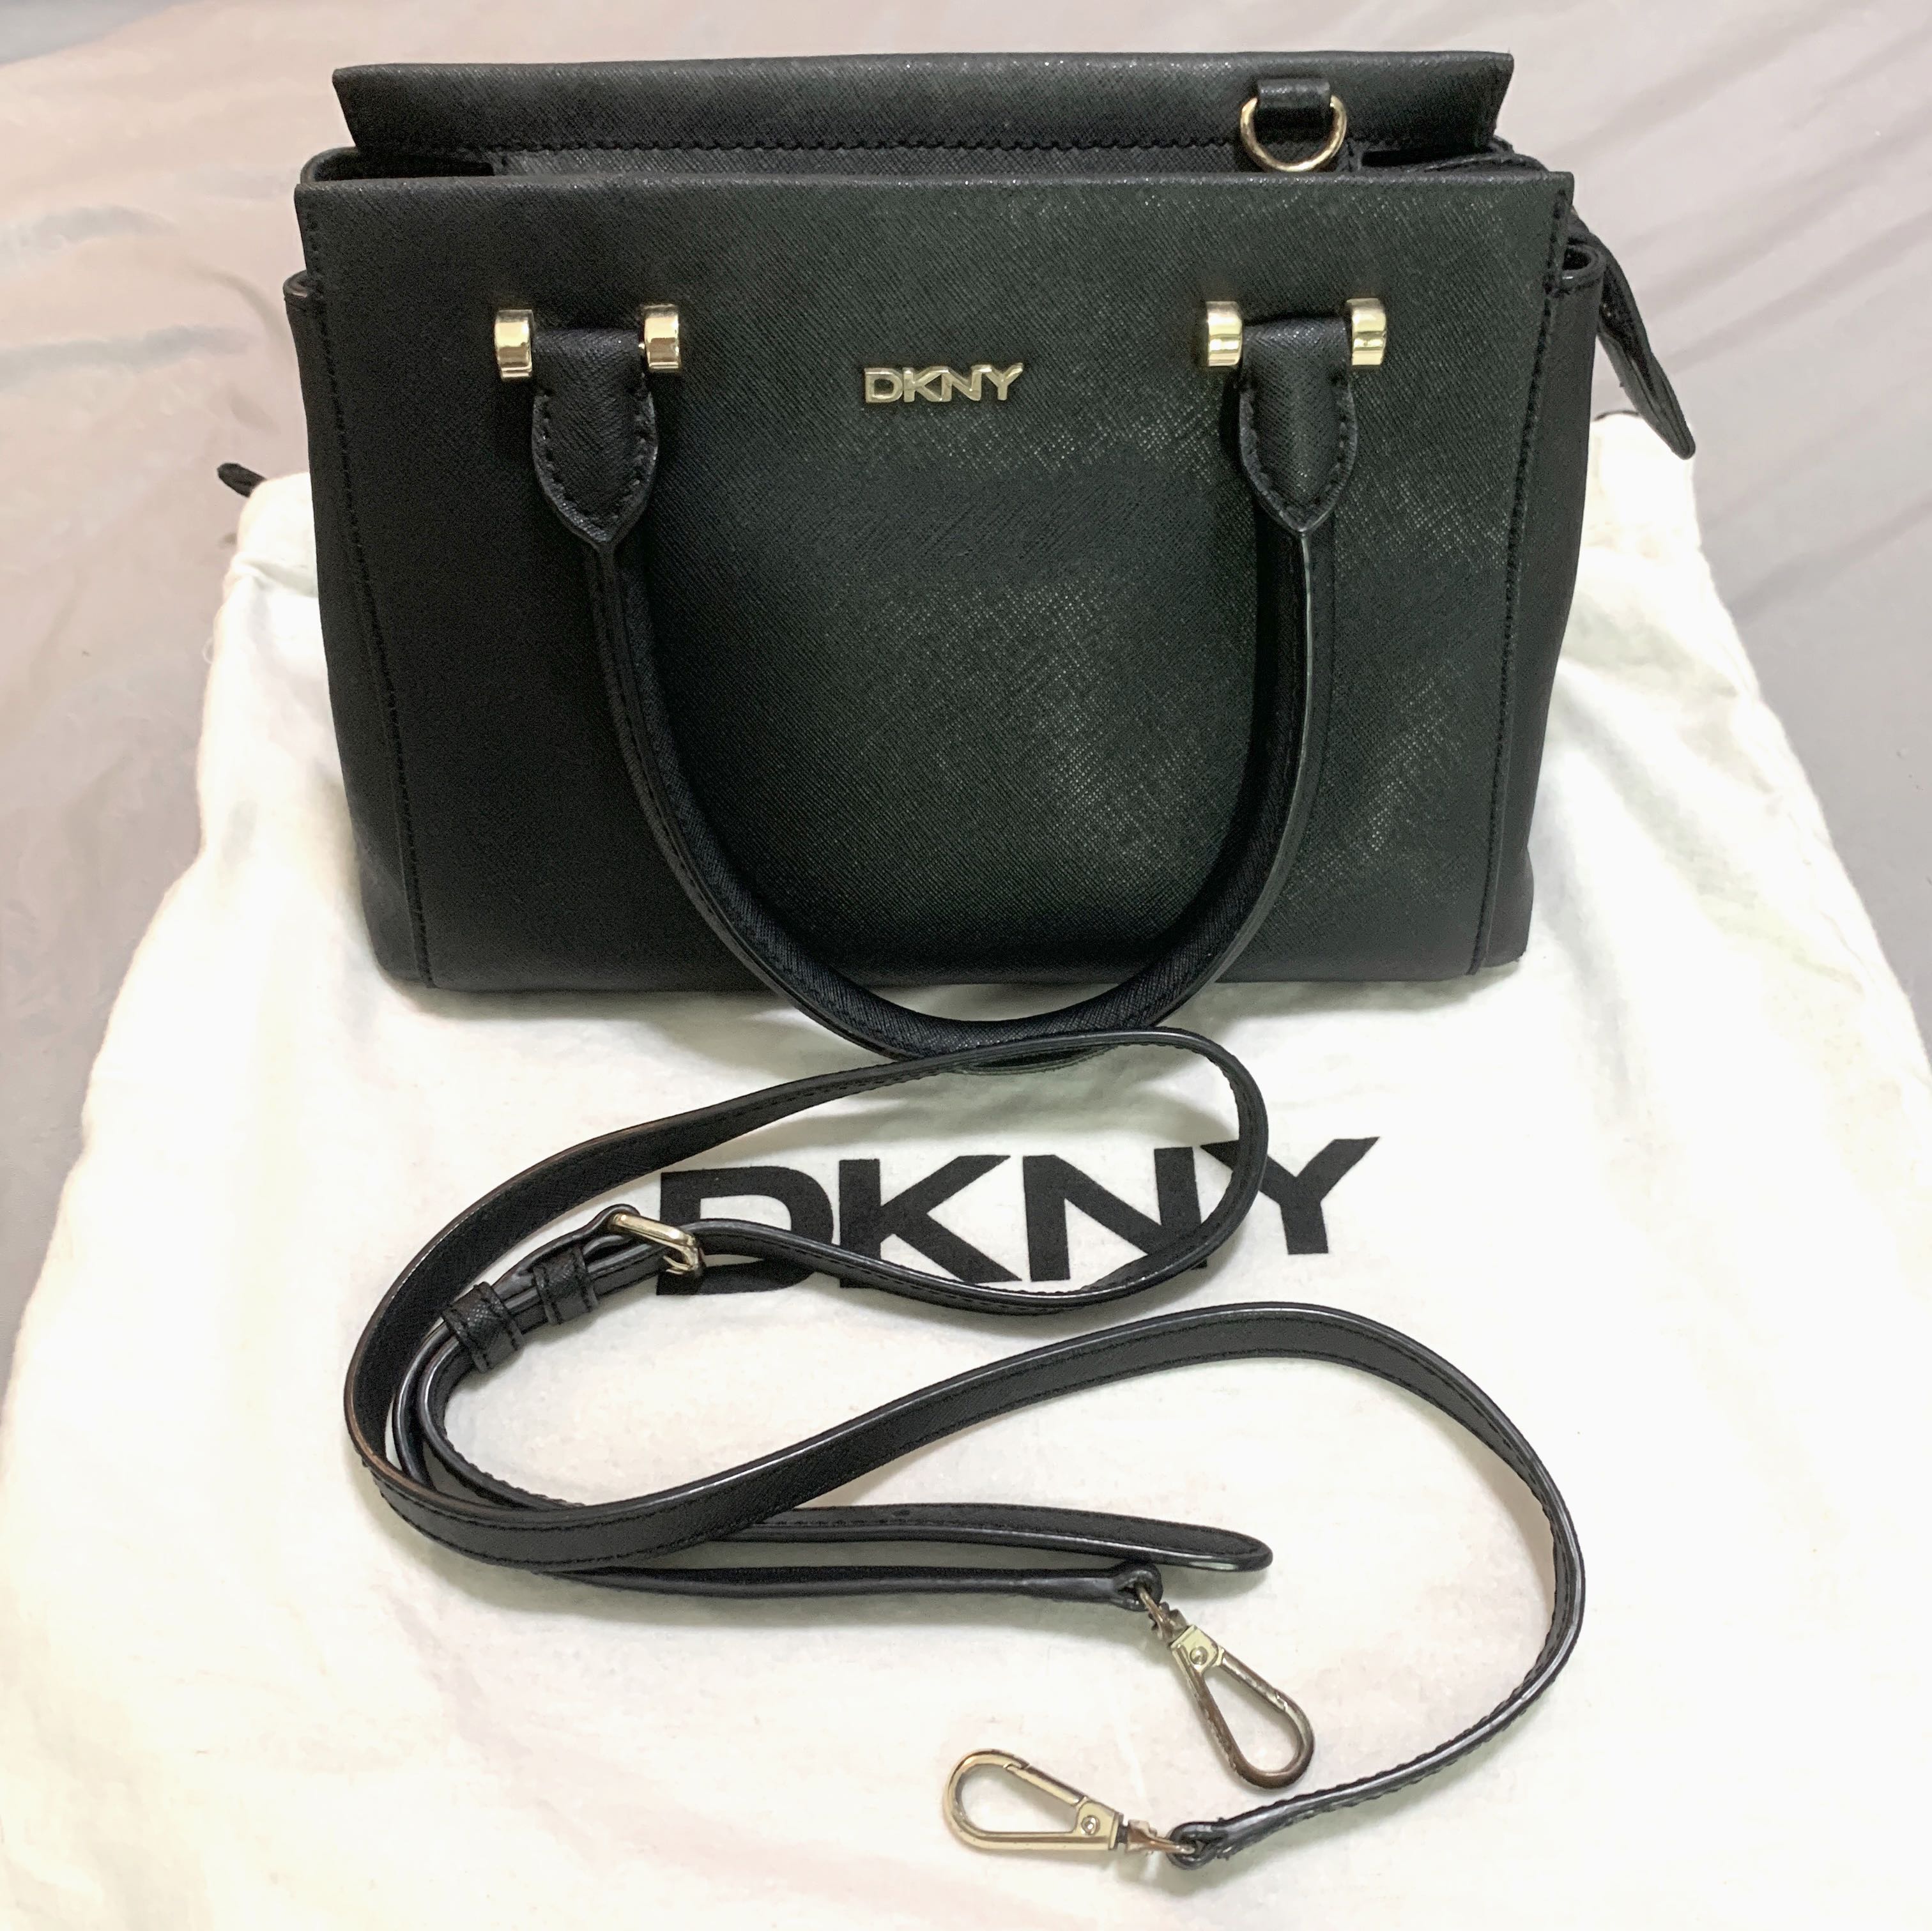 DKNY Saffiano Leather Small Tote Bag in Black